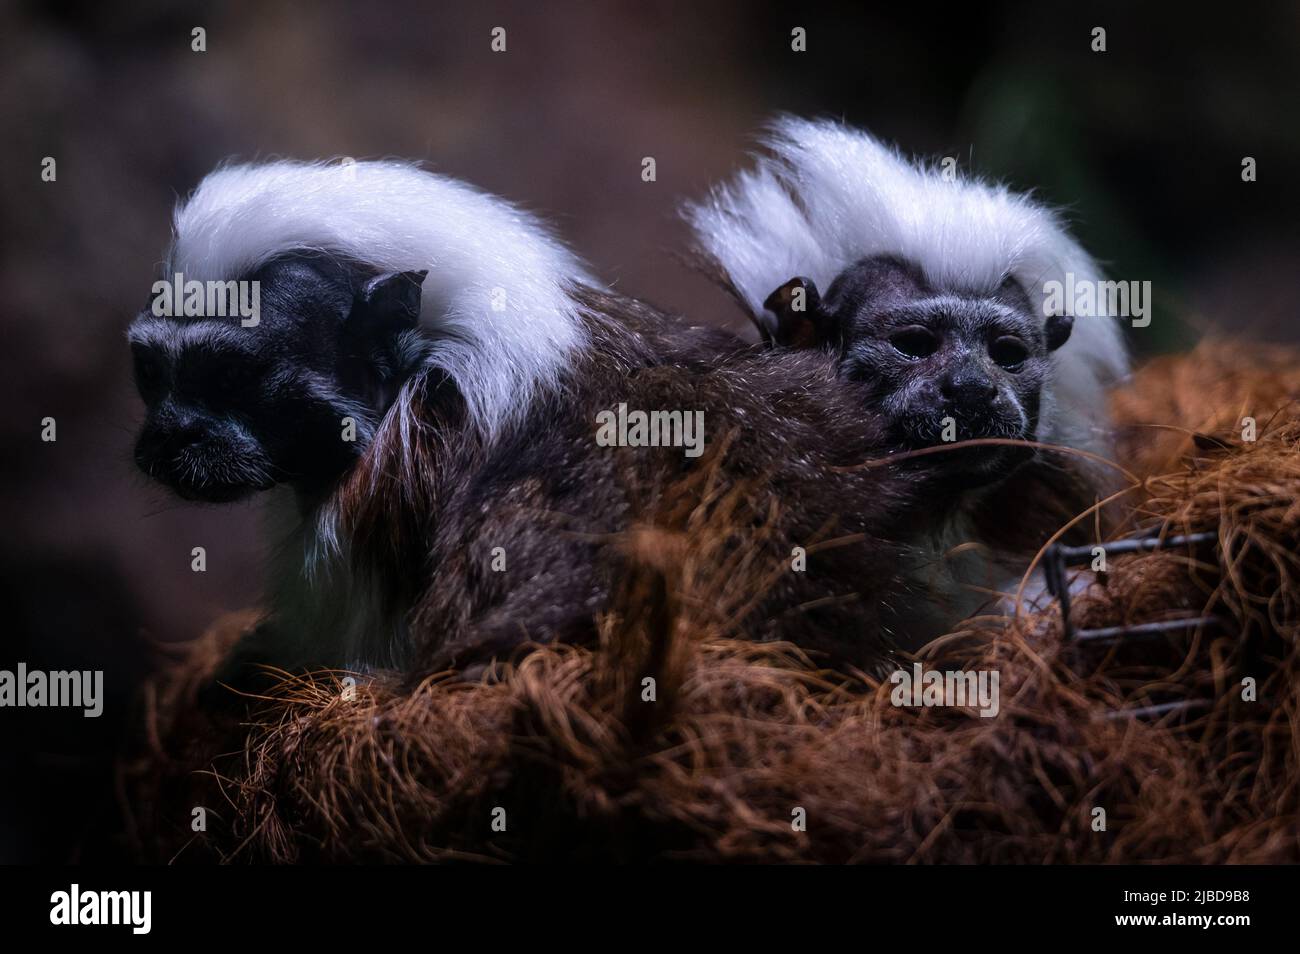 Two cotton-top tamarin (Saguinus oedipus), one of the smallest primates, pictured in their enclosure at Faunia zoo. Stock Photo